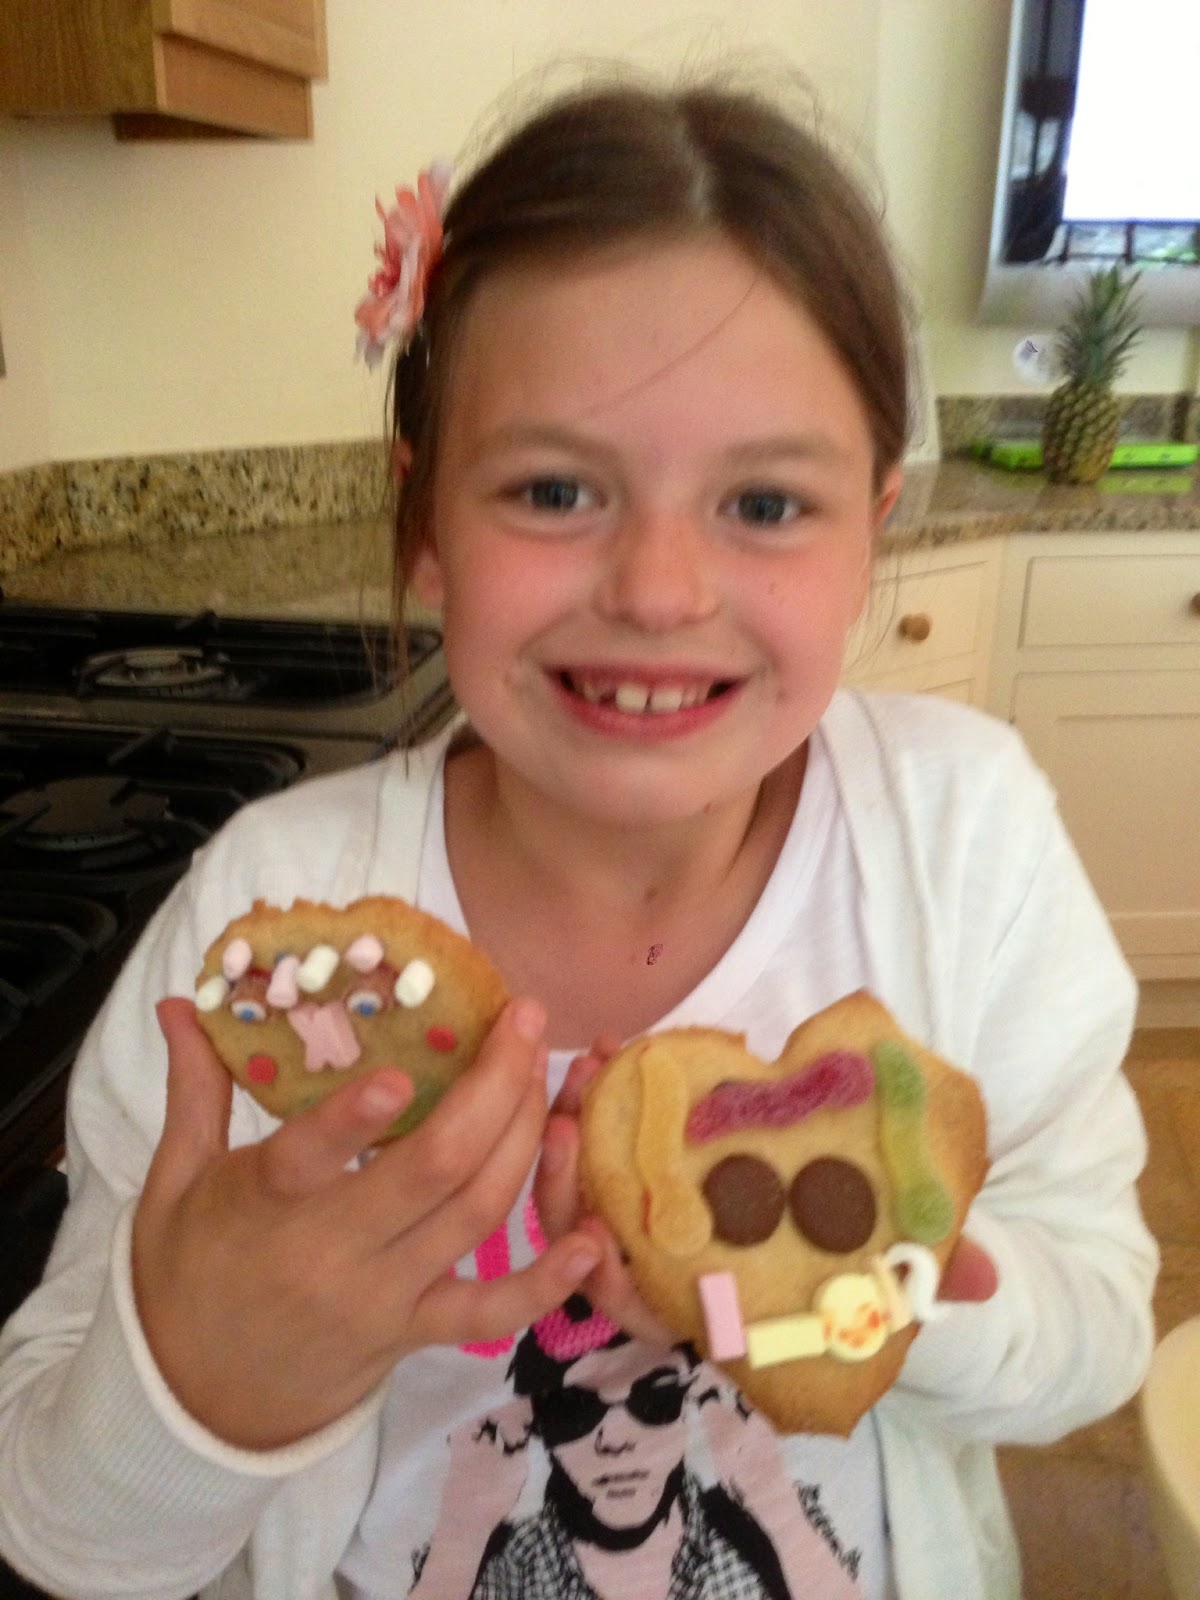 Brilliant Biscuit Baking (especially good for kids!)